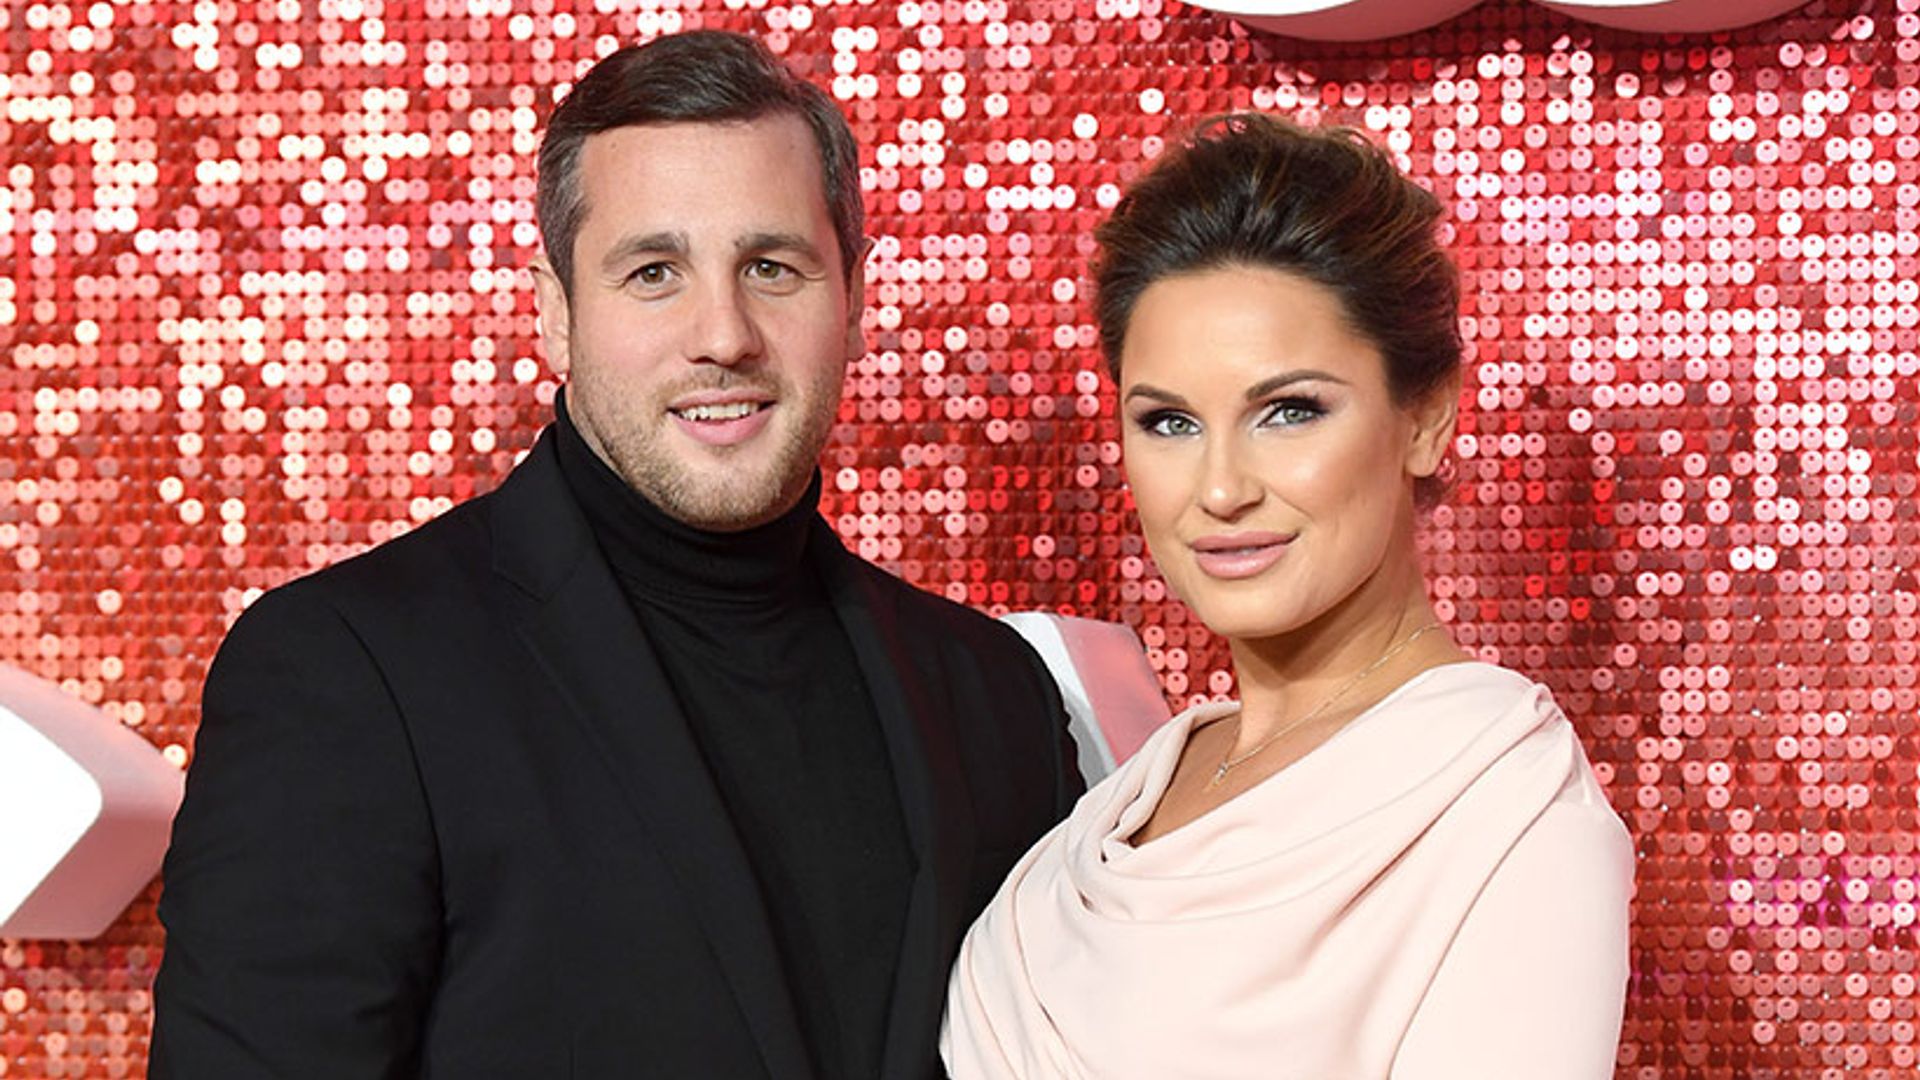 Sam Faiers opens up about decision not to share a bed with boyfriend Paul Knightley